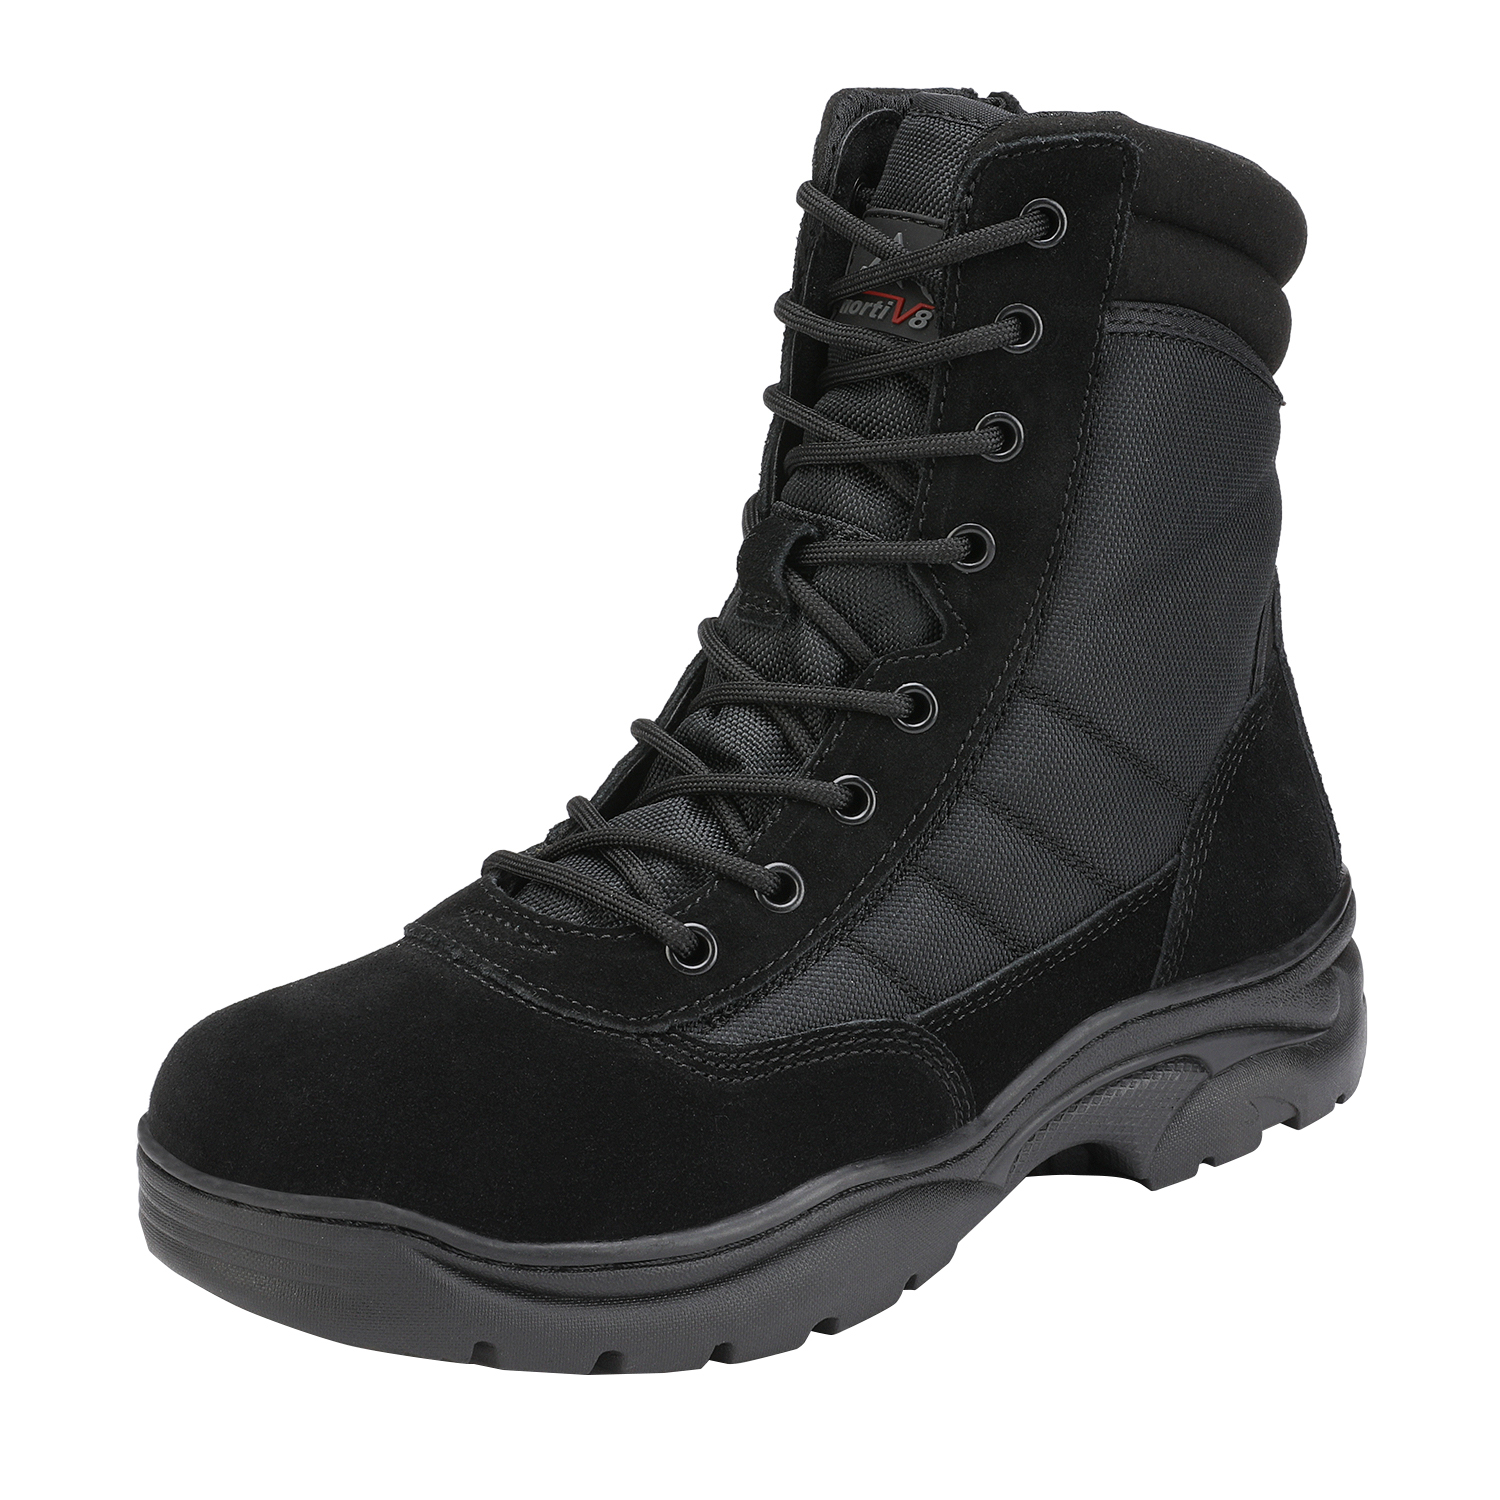 Nortiv 8 Men's Tactical Work Boots Zip Military Leather Motorcycle Combat Boots for Man Trooper Black/Suede Size 9 - image 1 of 6